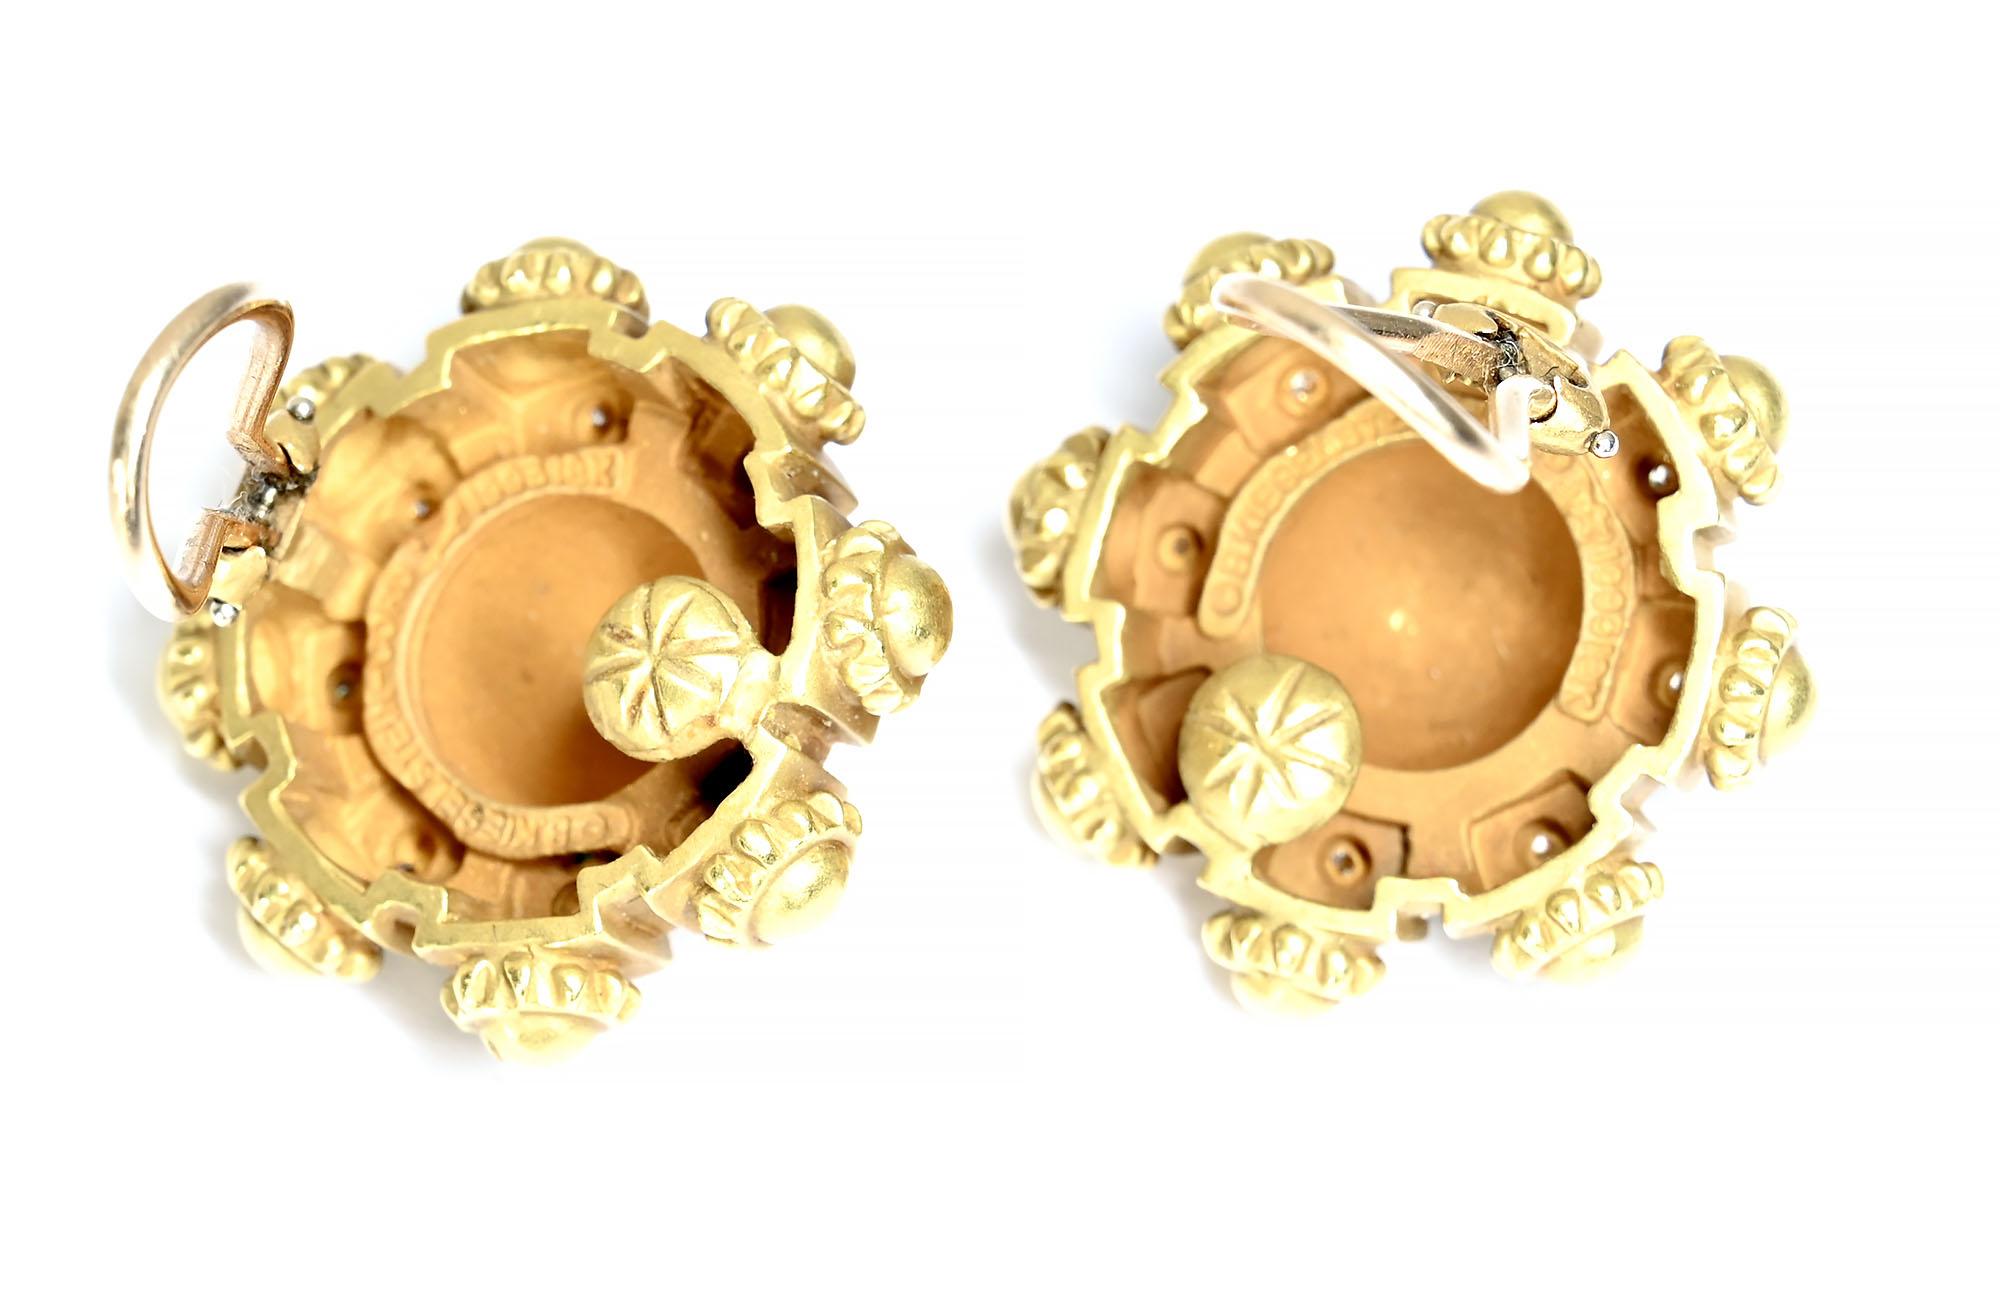 Contemporary Barry Kieselstein Cord Gold and Diamond Earrings For Sale